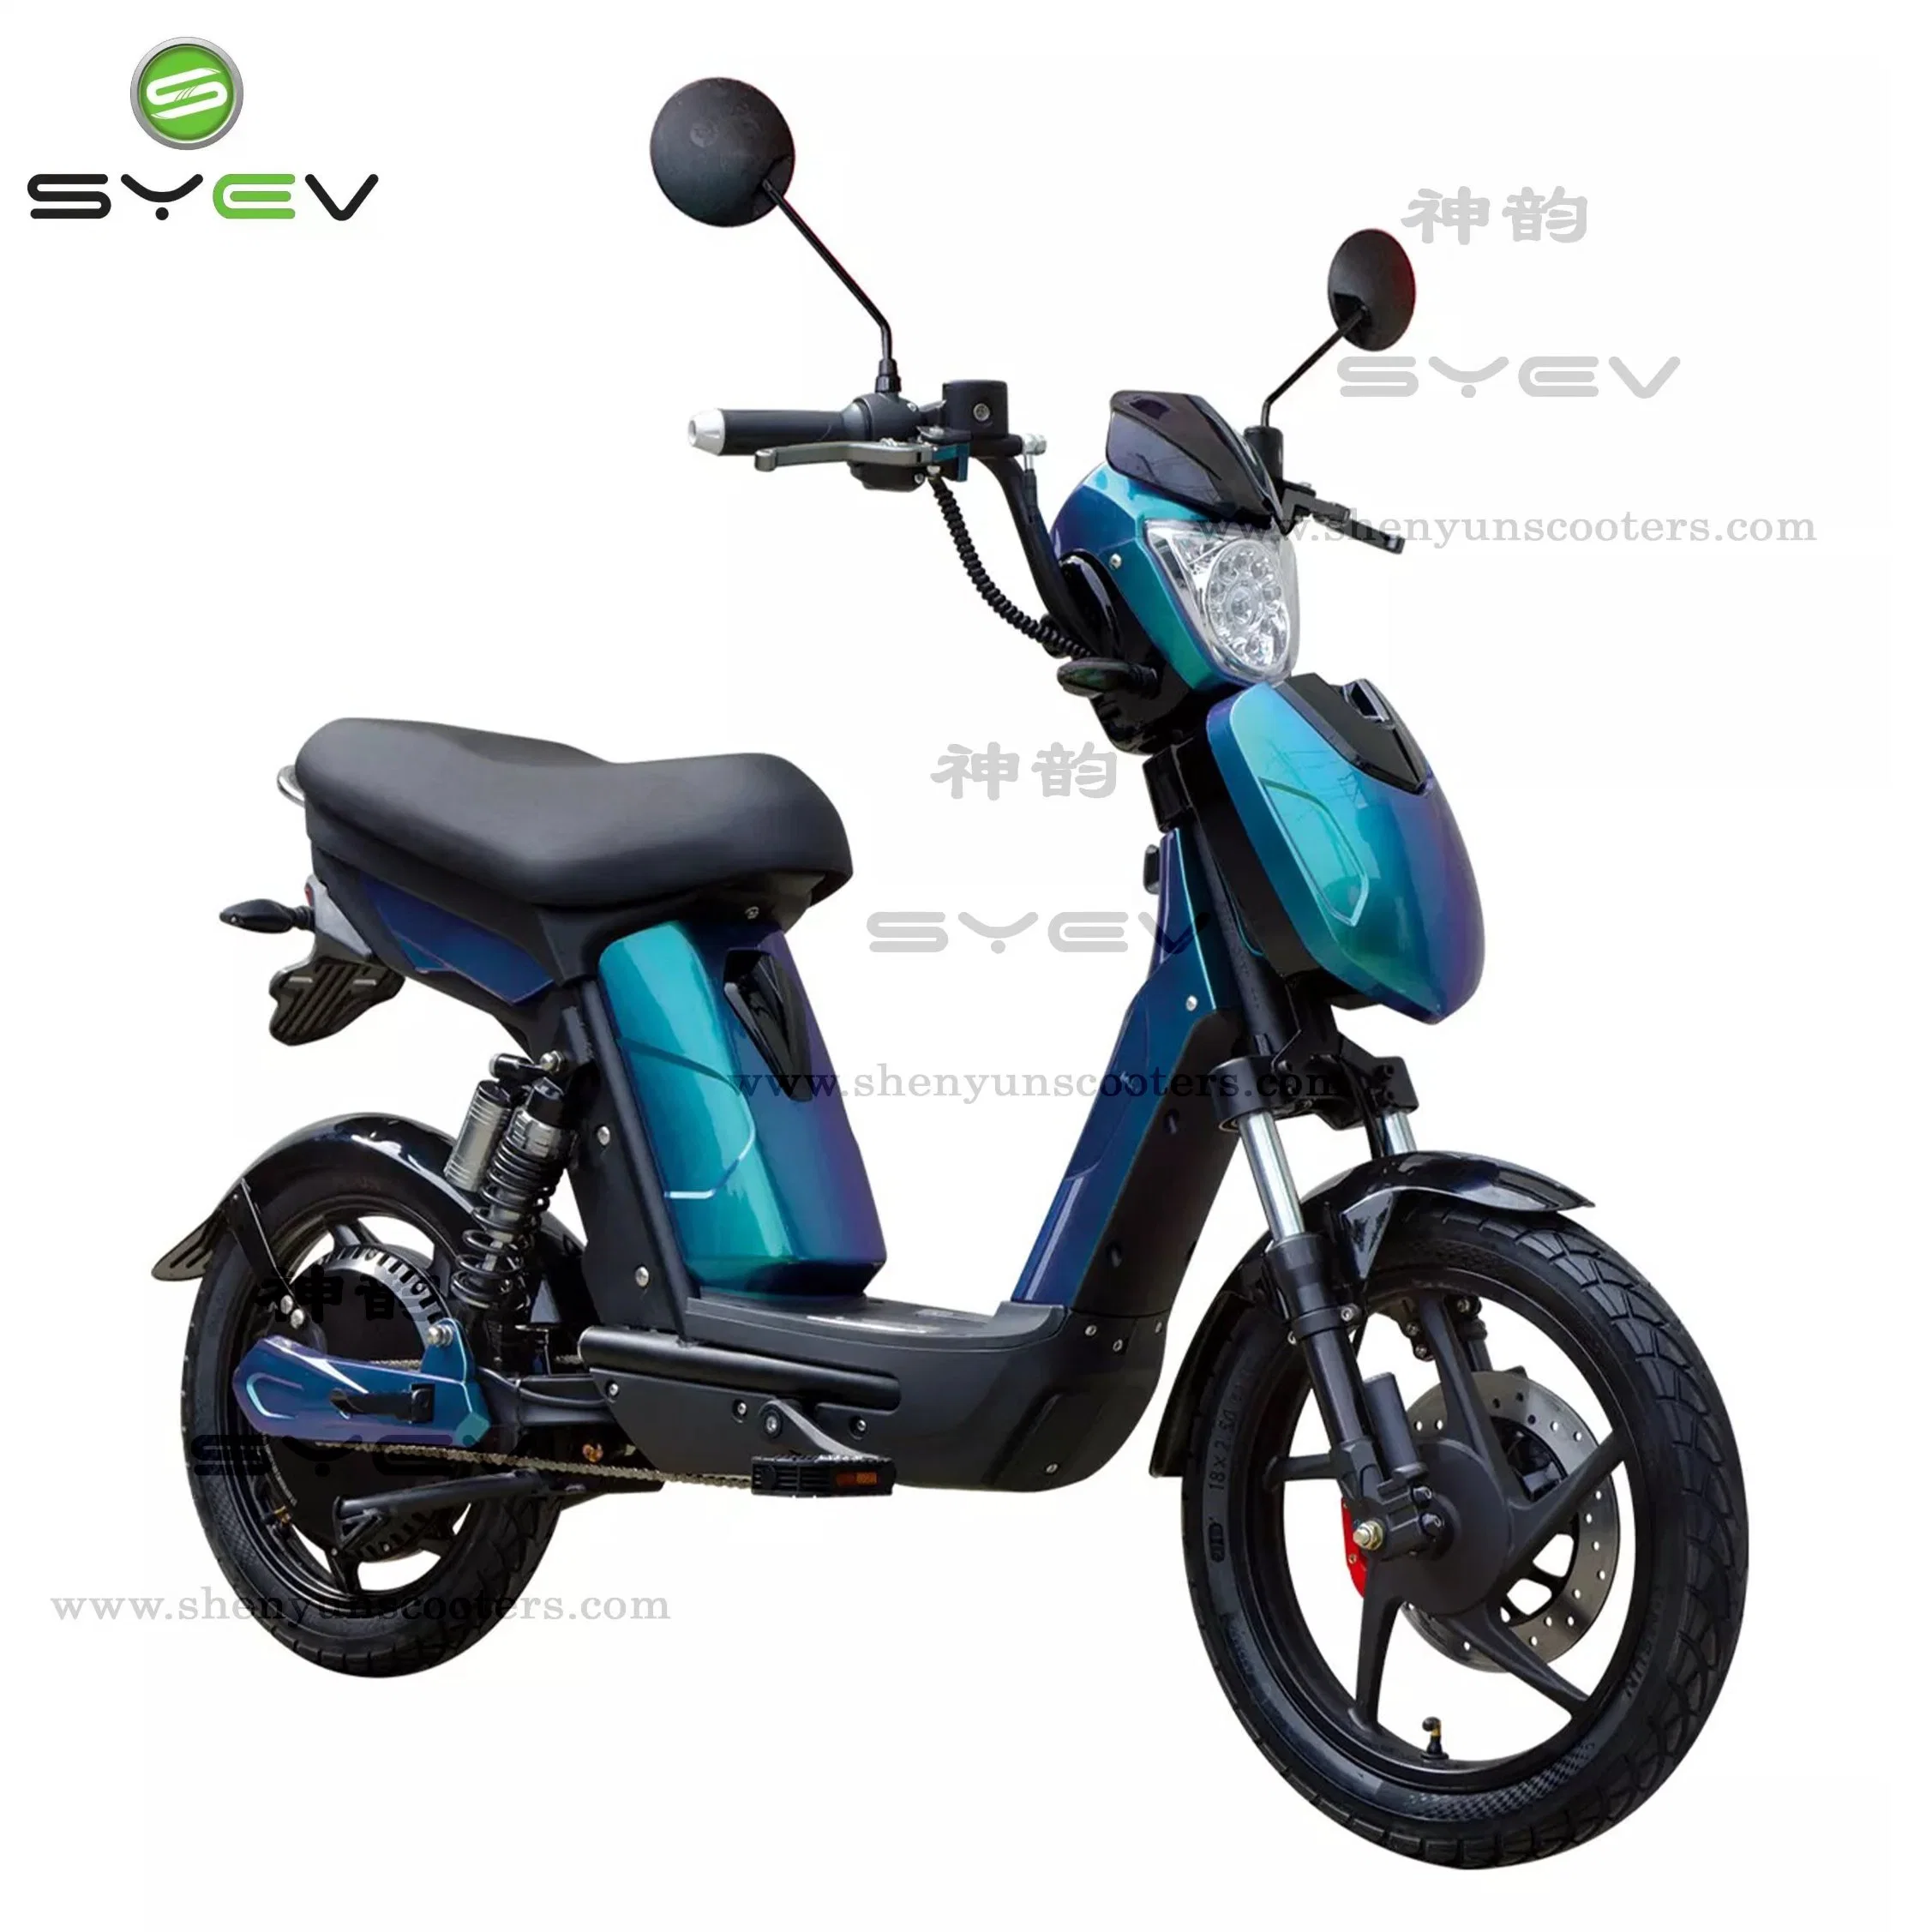 48V Long Range Ebike Electric Motorcycle Electronic Scooter with CE EEC